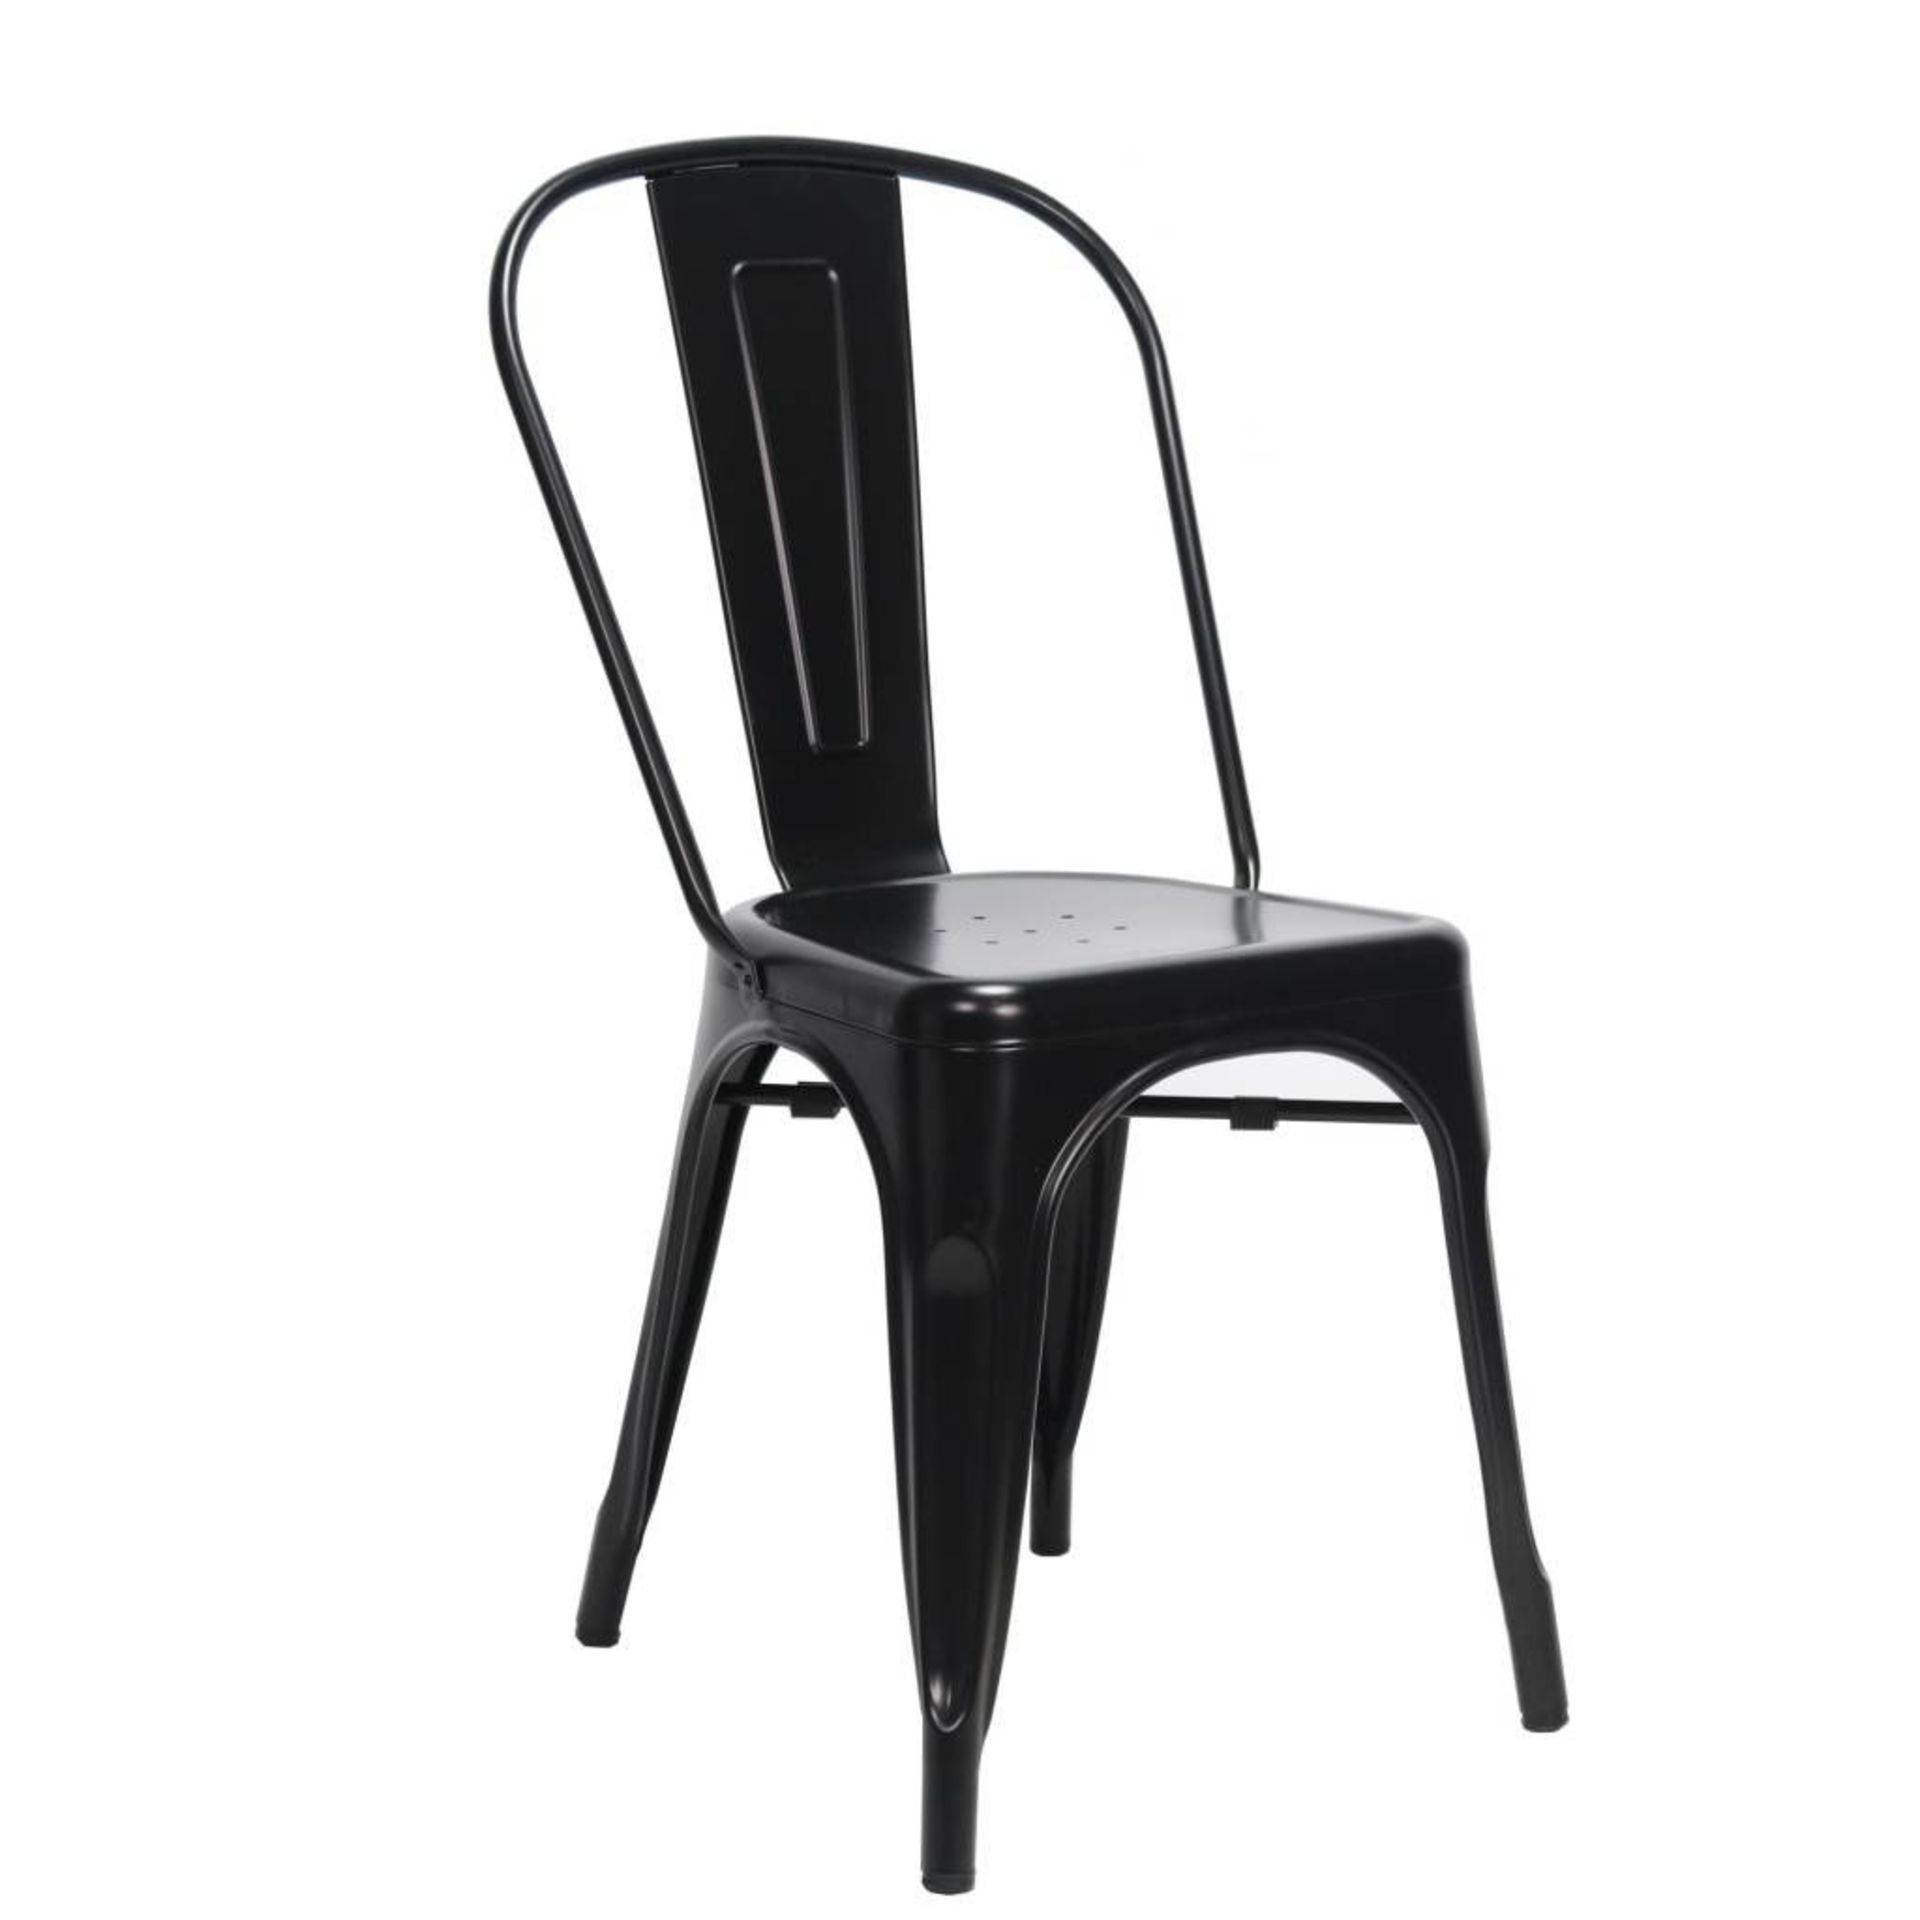 1 x Tolix Industrial Style Outdoor Bistro Table and Chair Set in Black - Includes 1 x Table and 4 - Image 8 of 11